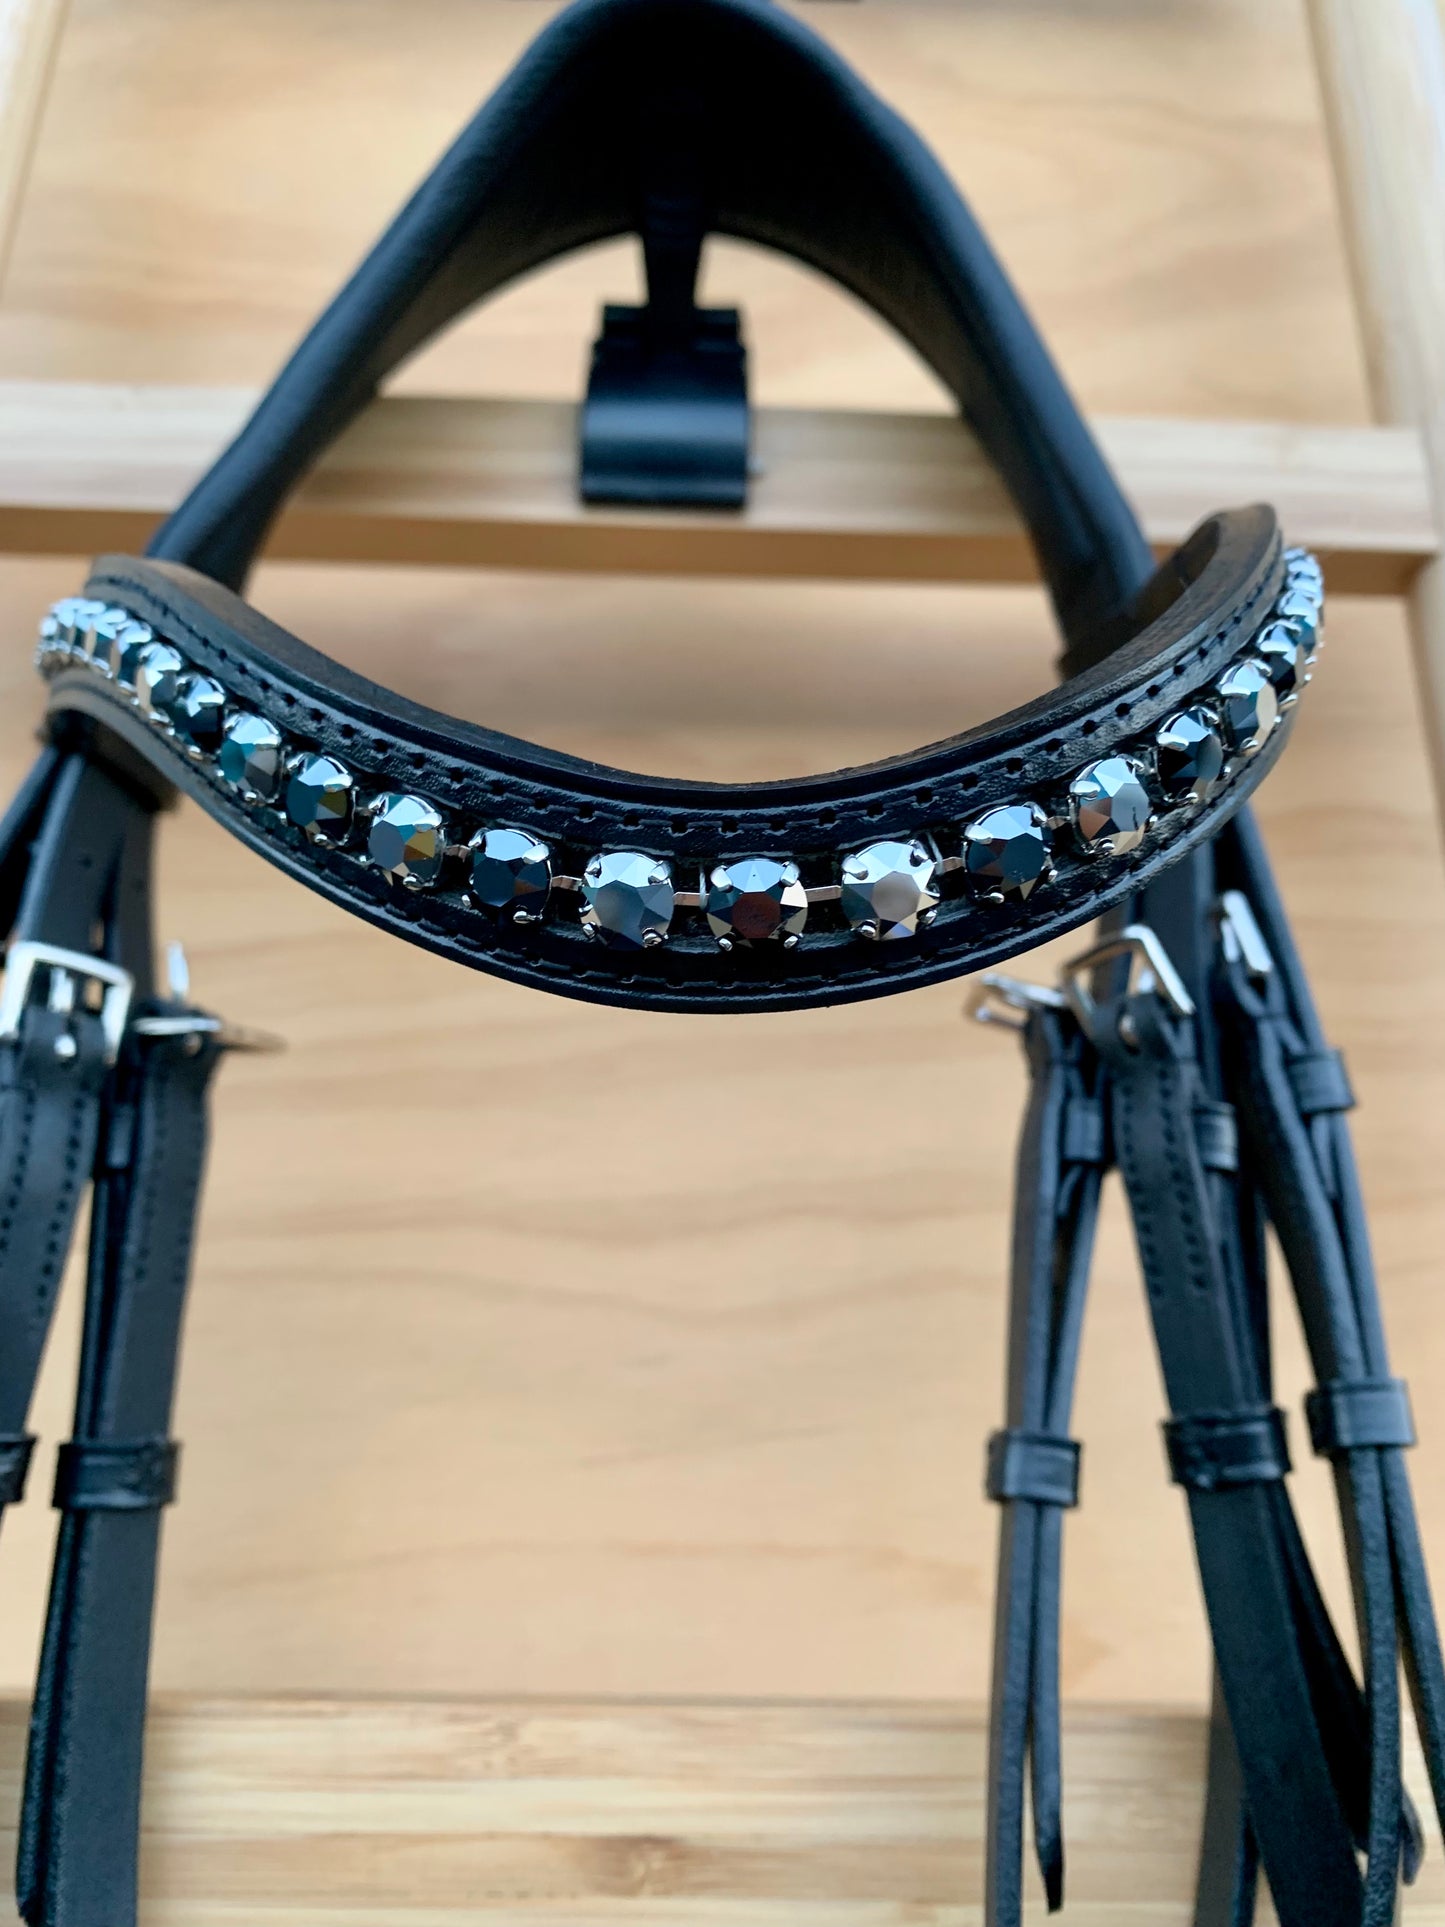 OTTO SCHUMACHER DOUBLE TOKYO WITH JET HEMATITE BROWBAND AND CUT BACK NOSEBAND